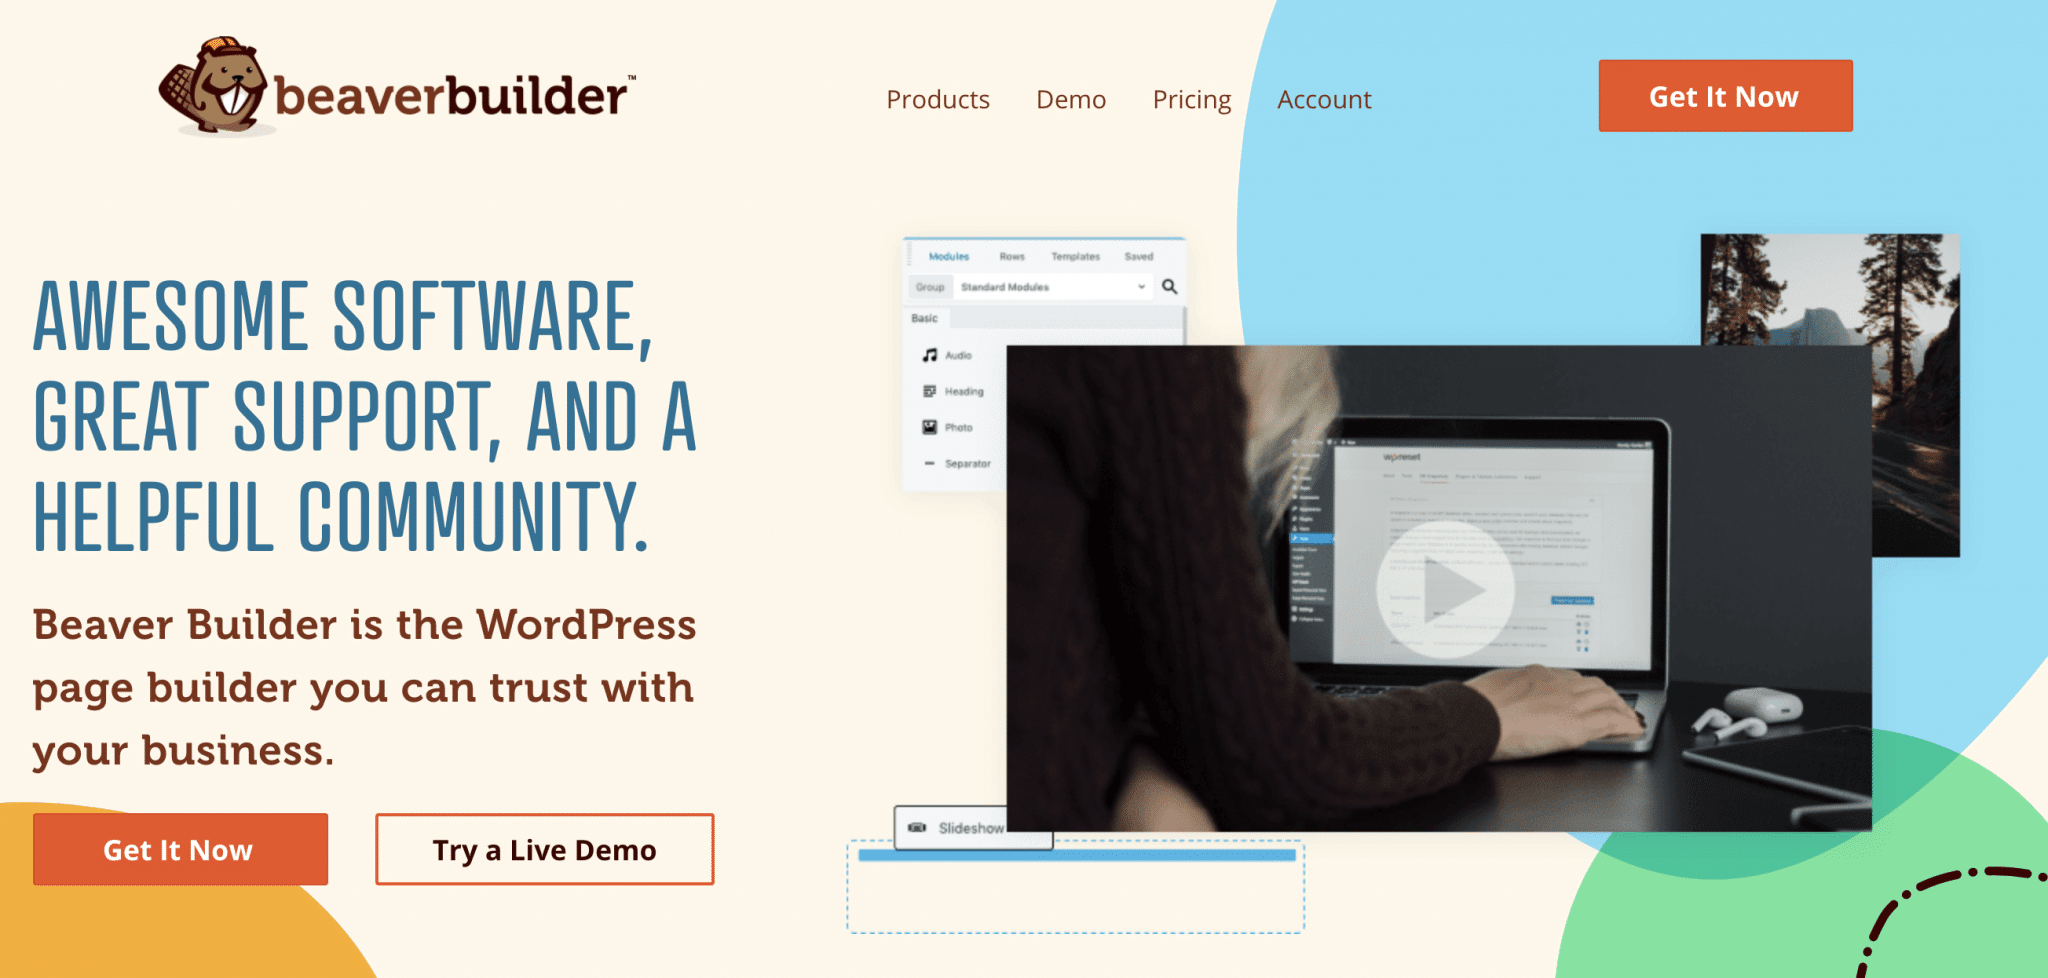 Beaver Builder is a WordPress page builder that works for landing pages too.